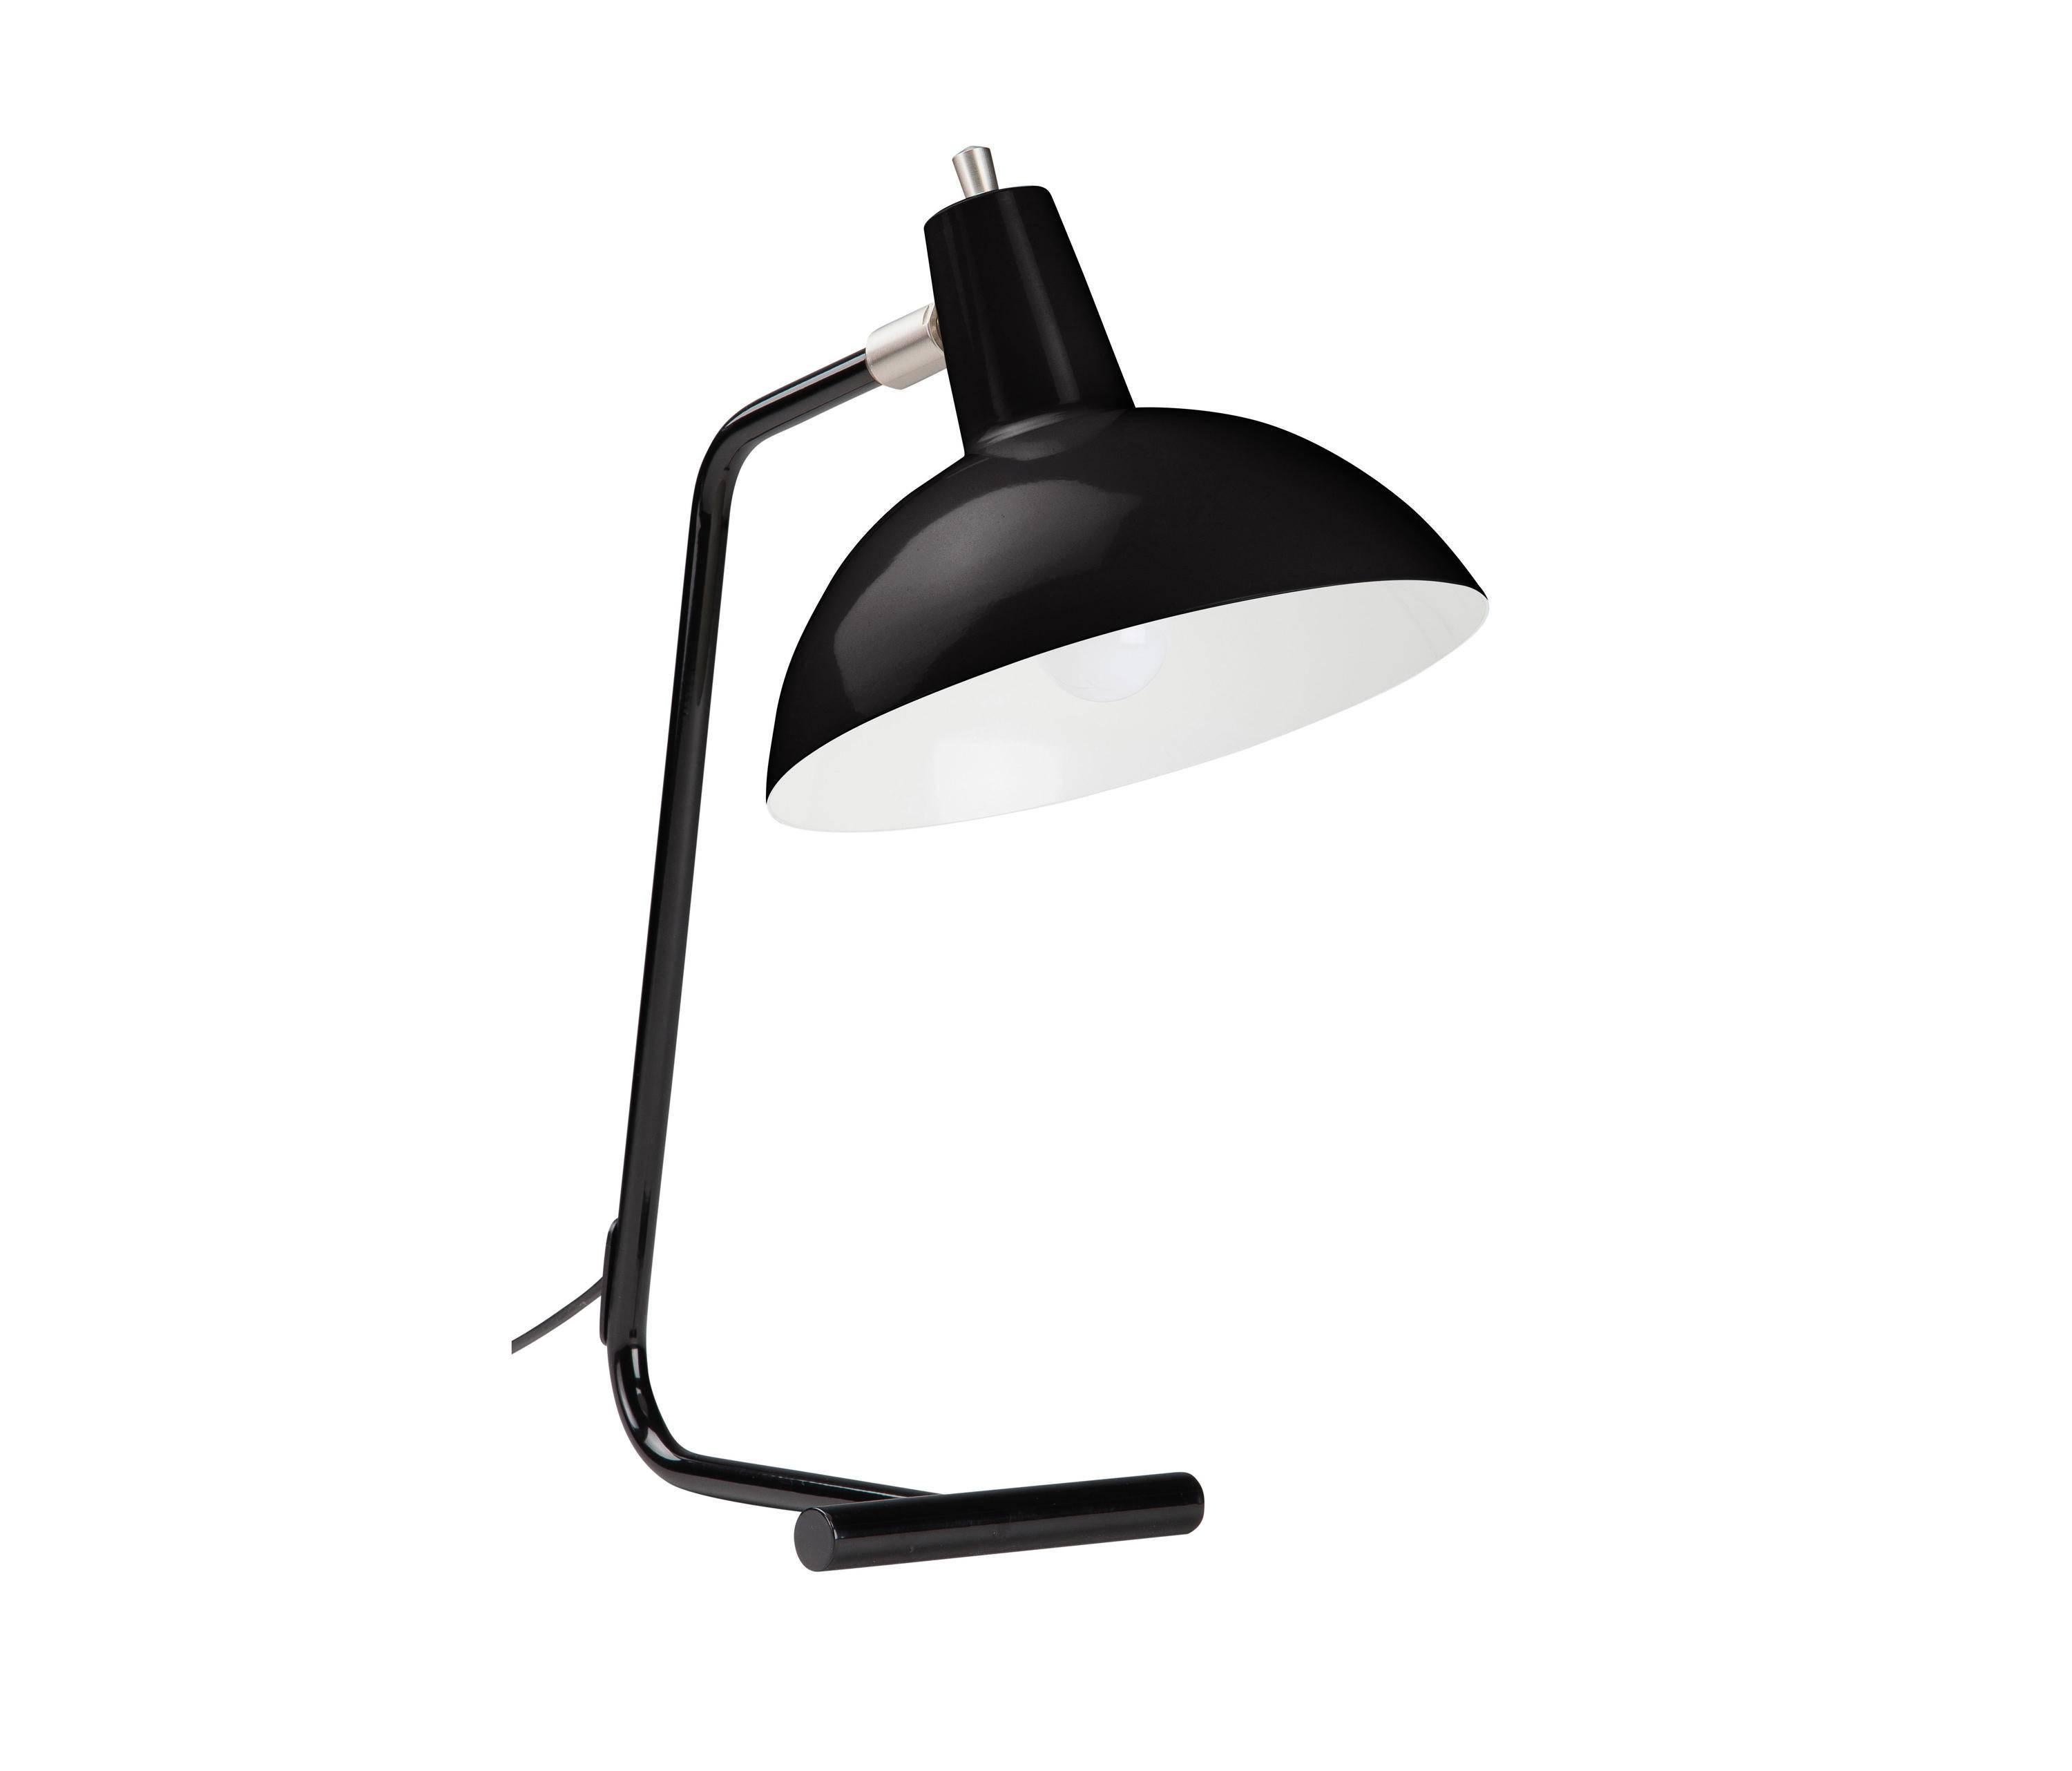 J.J.M. Hoogervorst black 'Director' table light for Anvia. Executed in painted aluminum and steel, with adjustable shade. Based on the original and rare type 6019 table lamp from the 1960s. 'The Director' was named in homage to the original founder